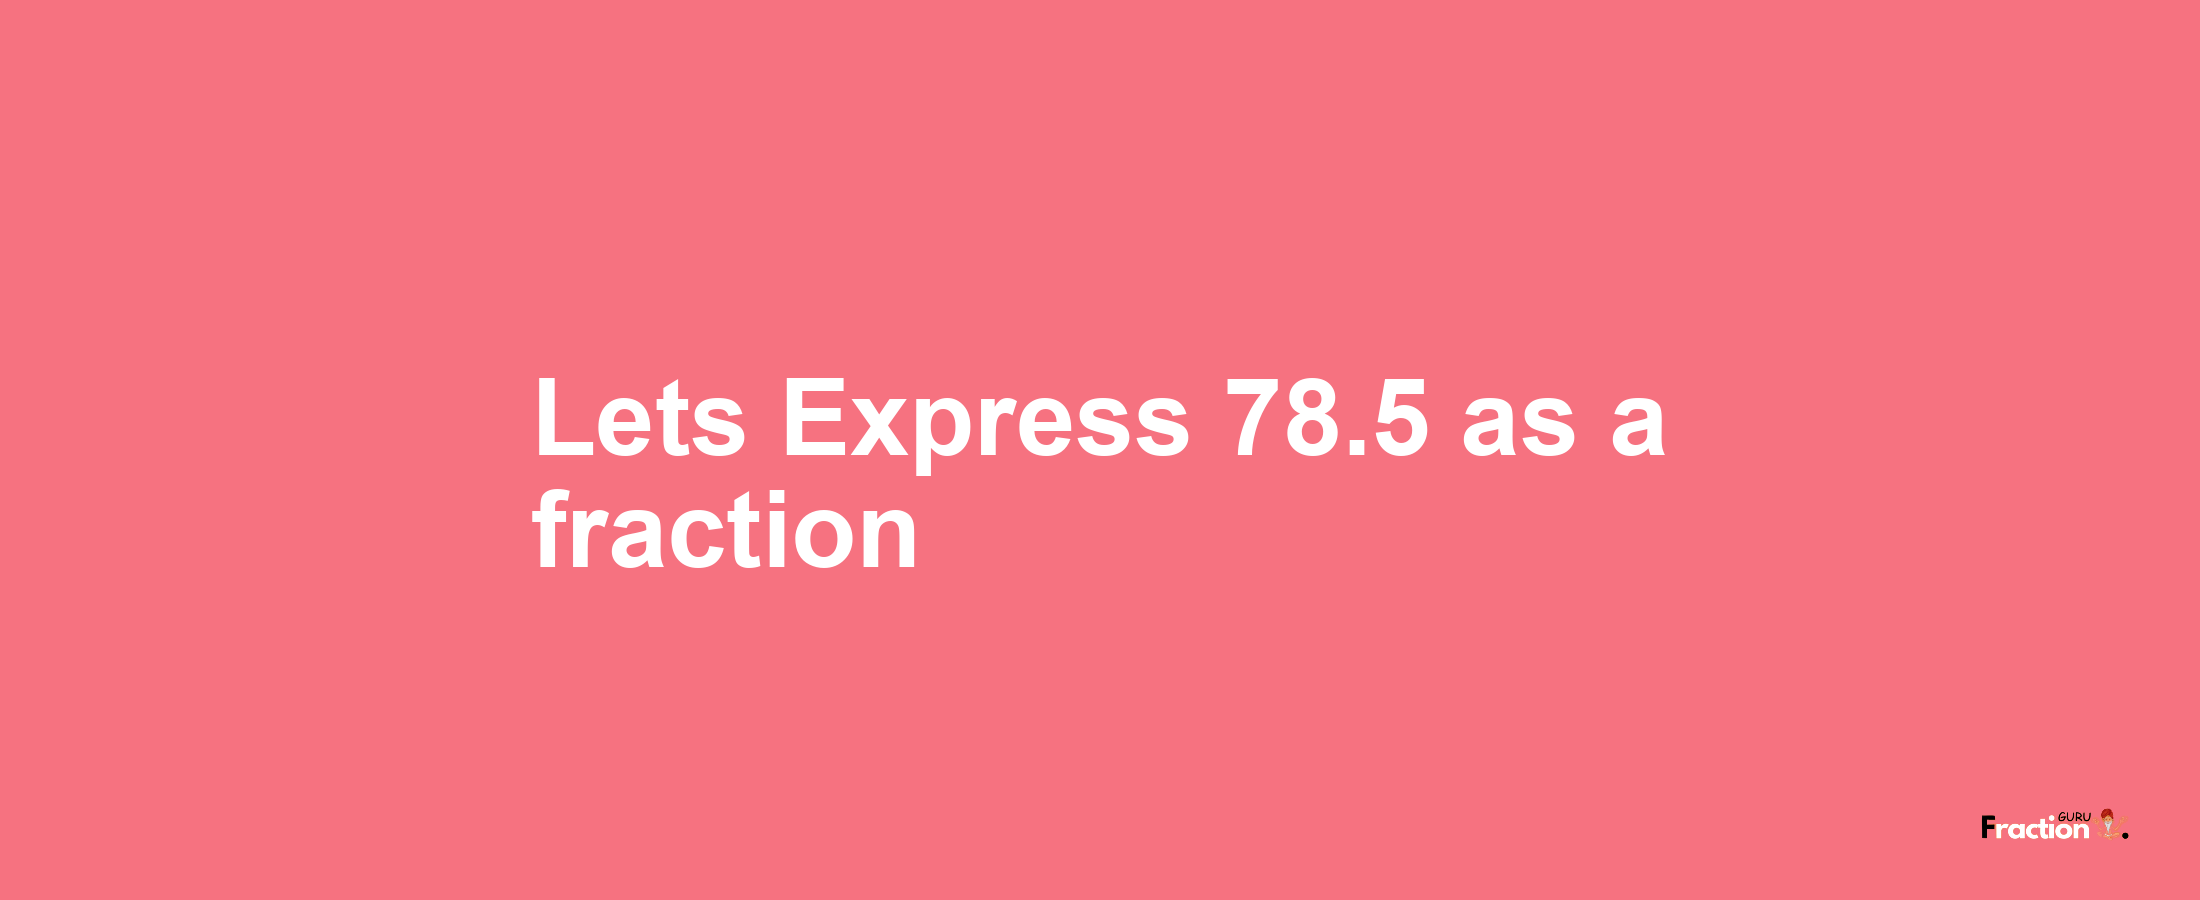 Lets Express 78.5 as afraction